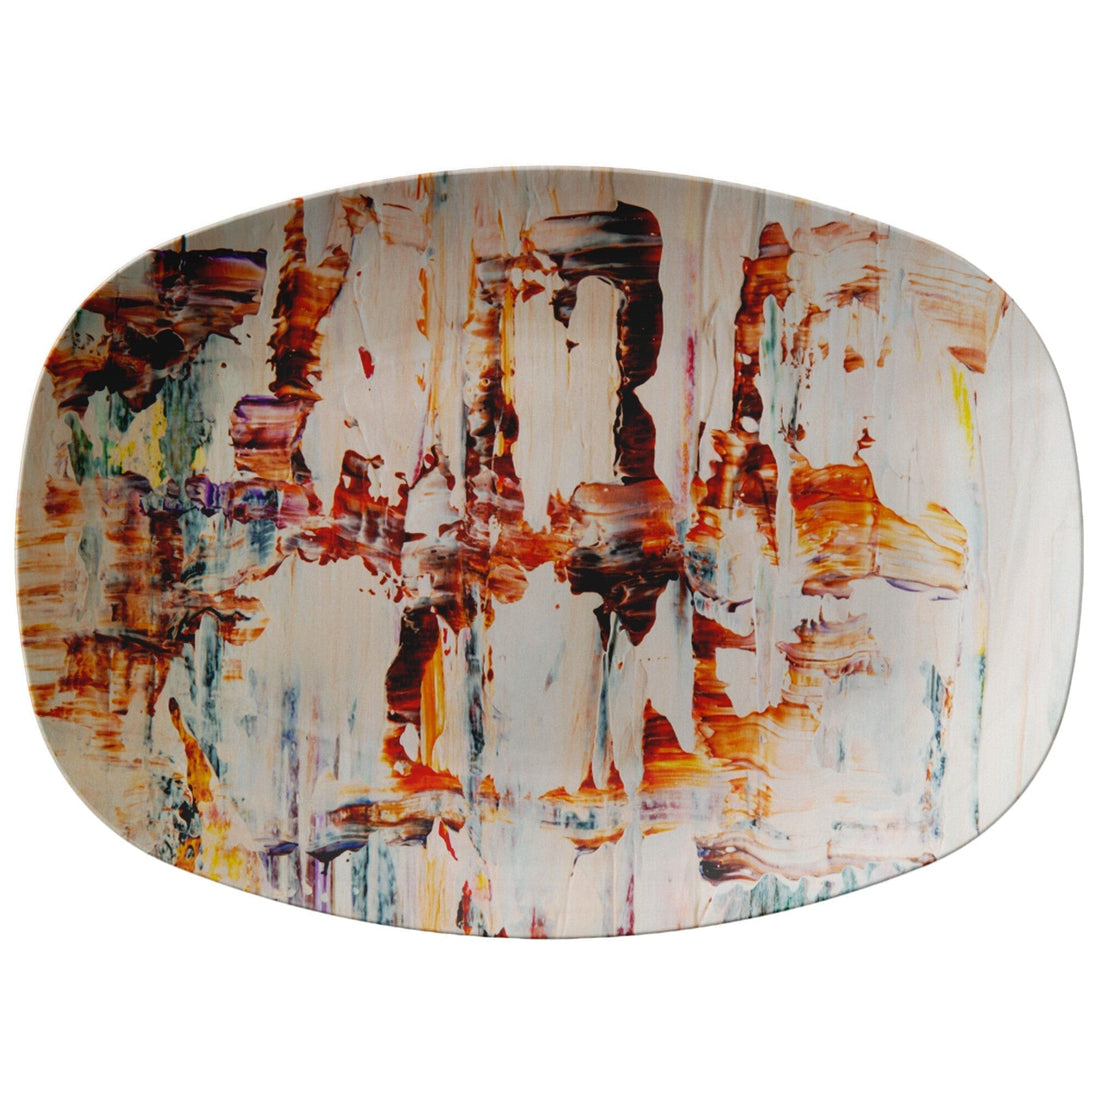 Kate McEnroe New York Serving Platter in Contemporary Abstract ArtServing Platters9727